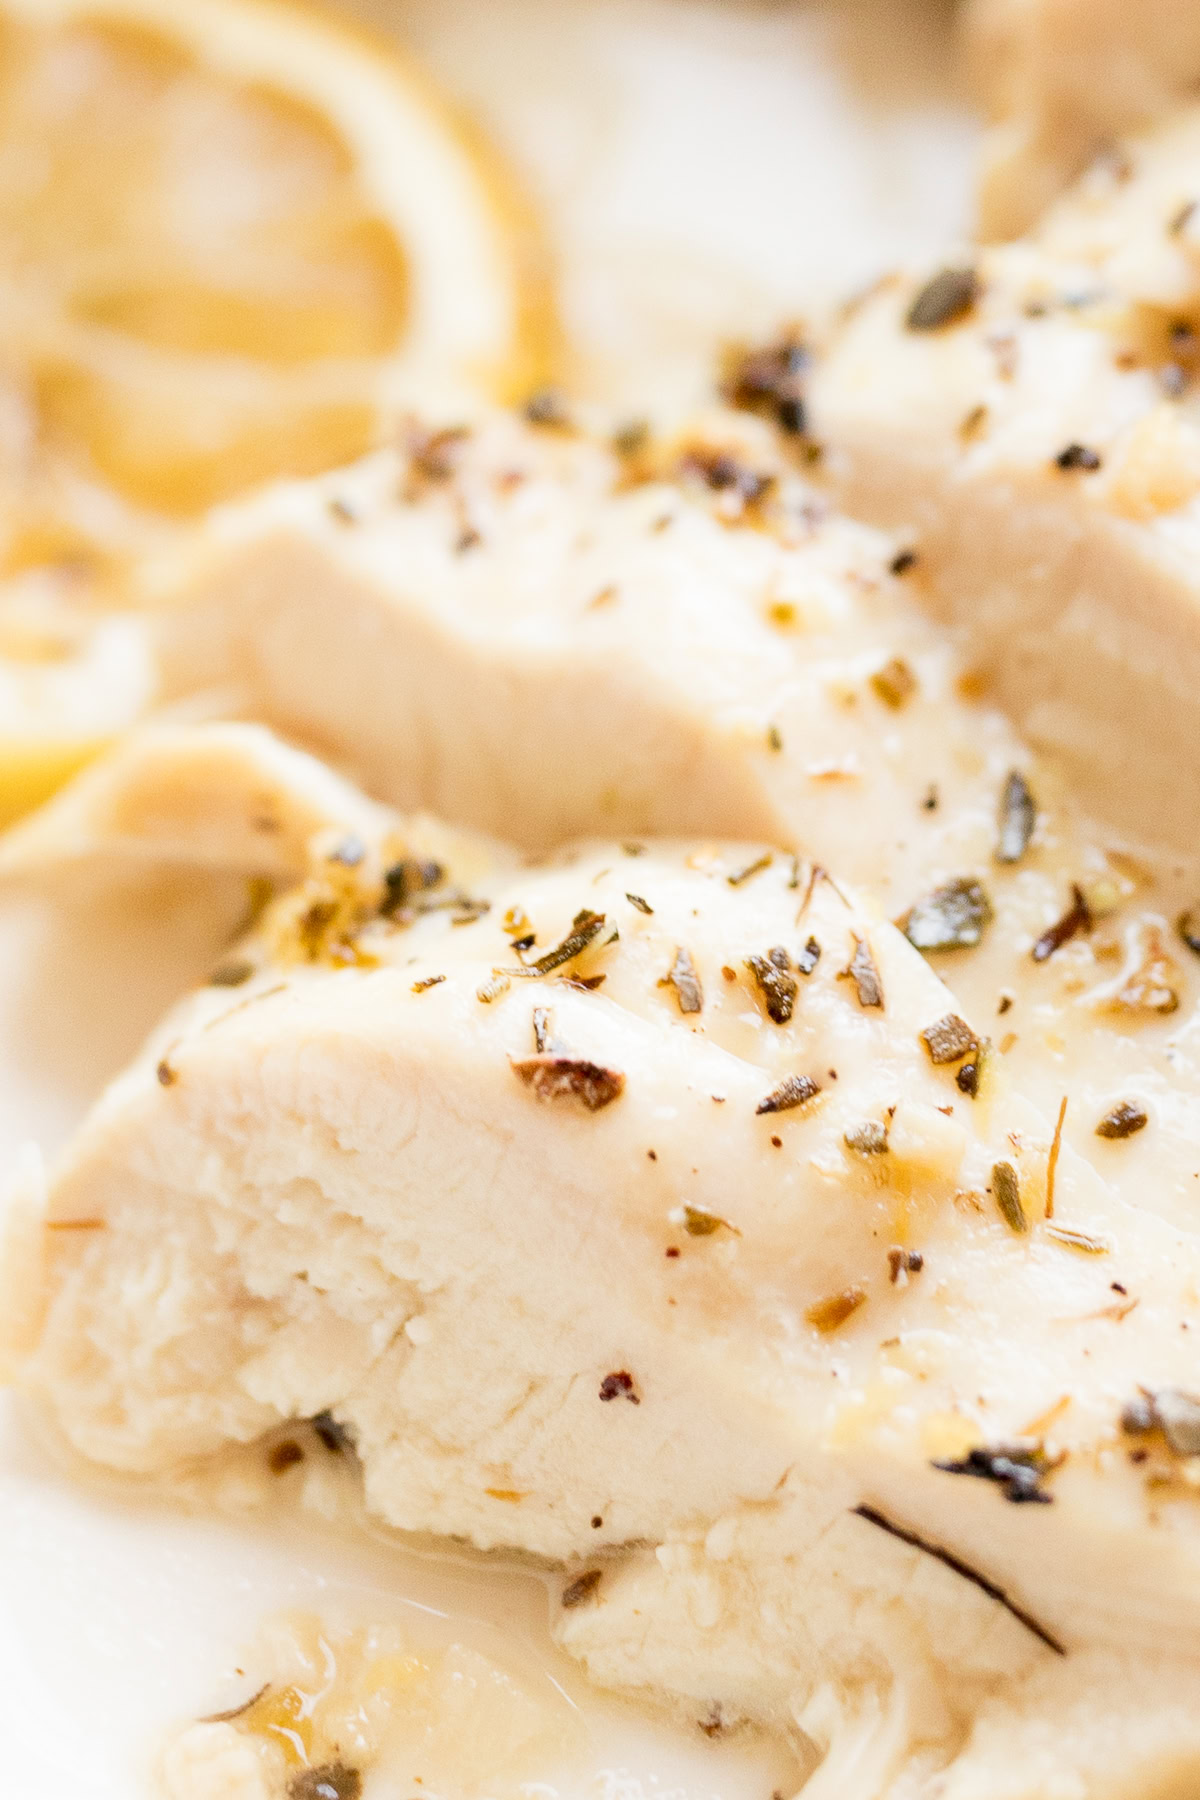 Close-up of sliced, seasoned lemon chicken breast with visible herbs and spices, emphasizing the texture and juiciness of the meat.